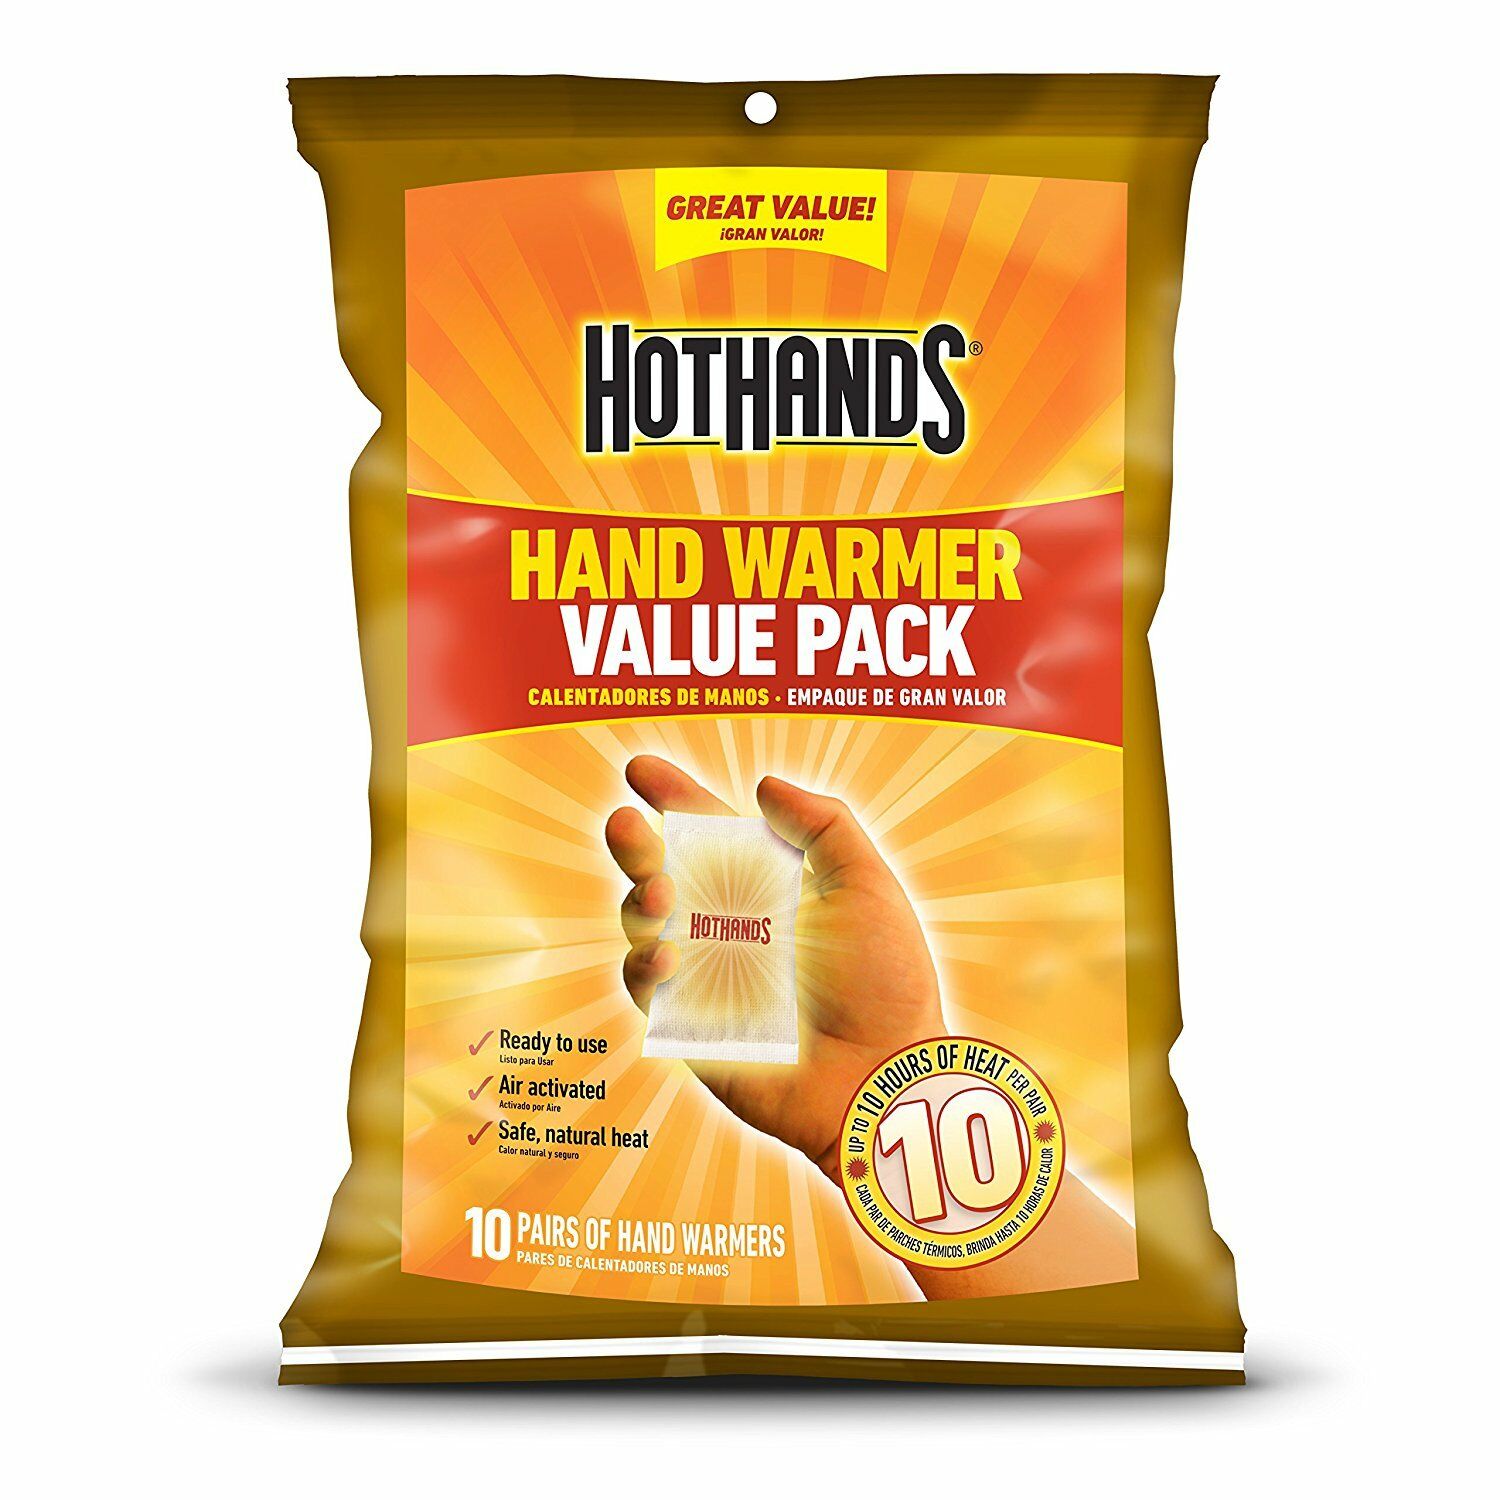 Hothands Hand Warmers Value Pack! 10 Pairs